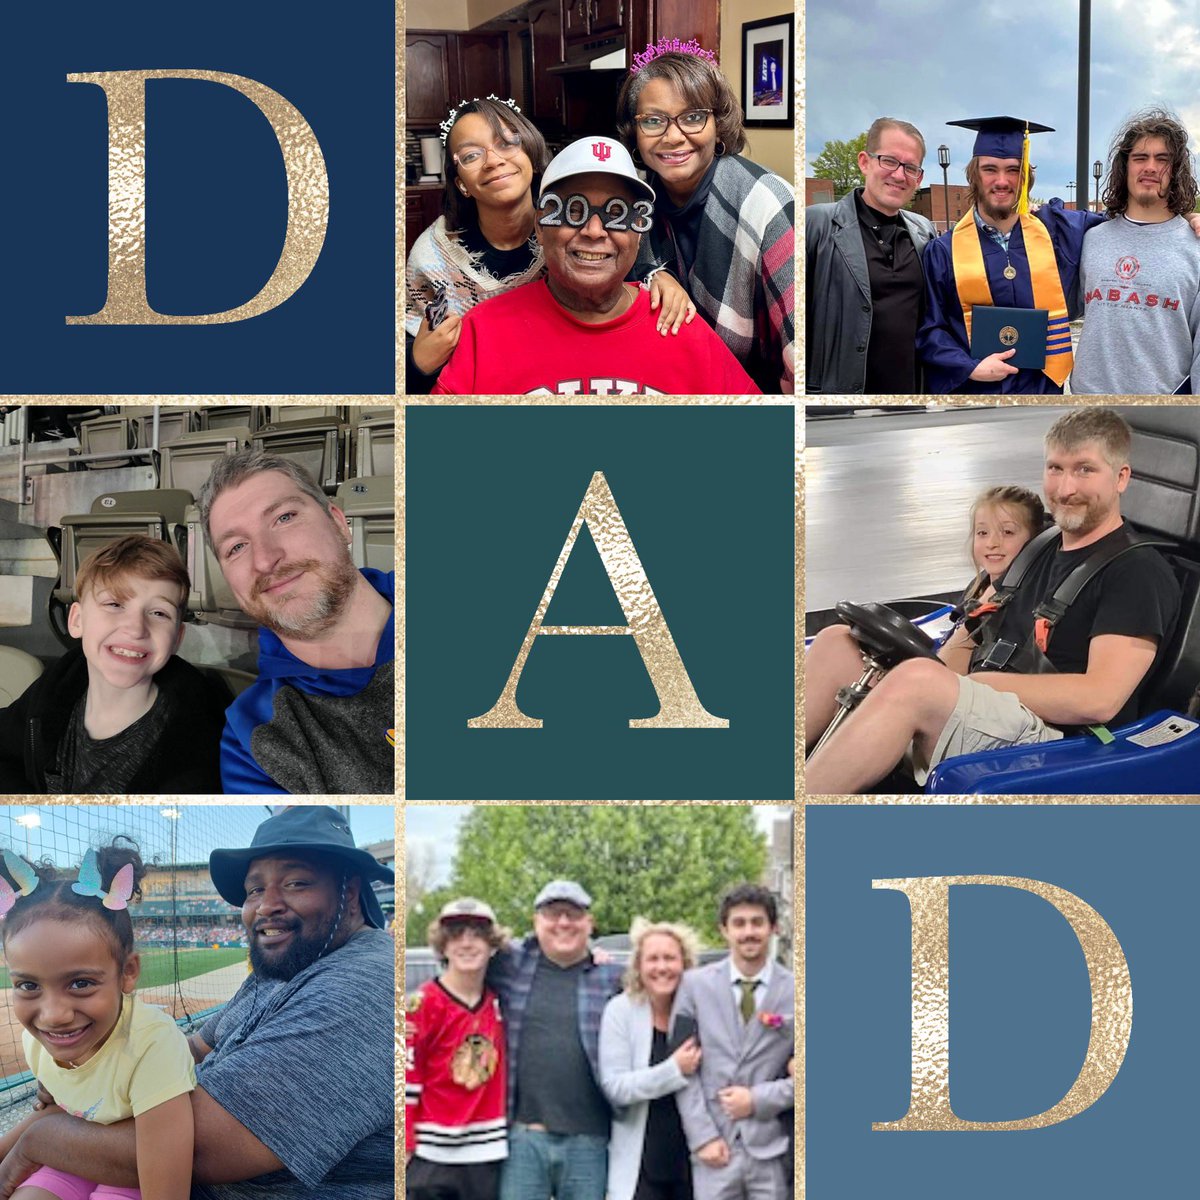 Happy Father’s Day to all the incredible dads out there! Your love, sacrifices, guidance, and presence makes a world of difference. You are true heroes in our eyes! 🛡️⚔️♥️#June182023 #BPEKnightsDadsROCK